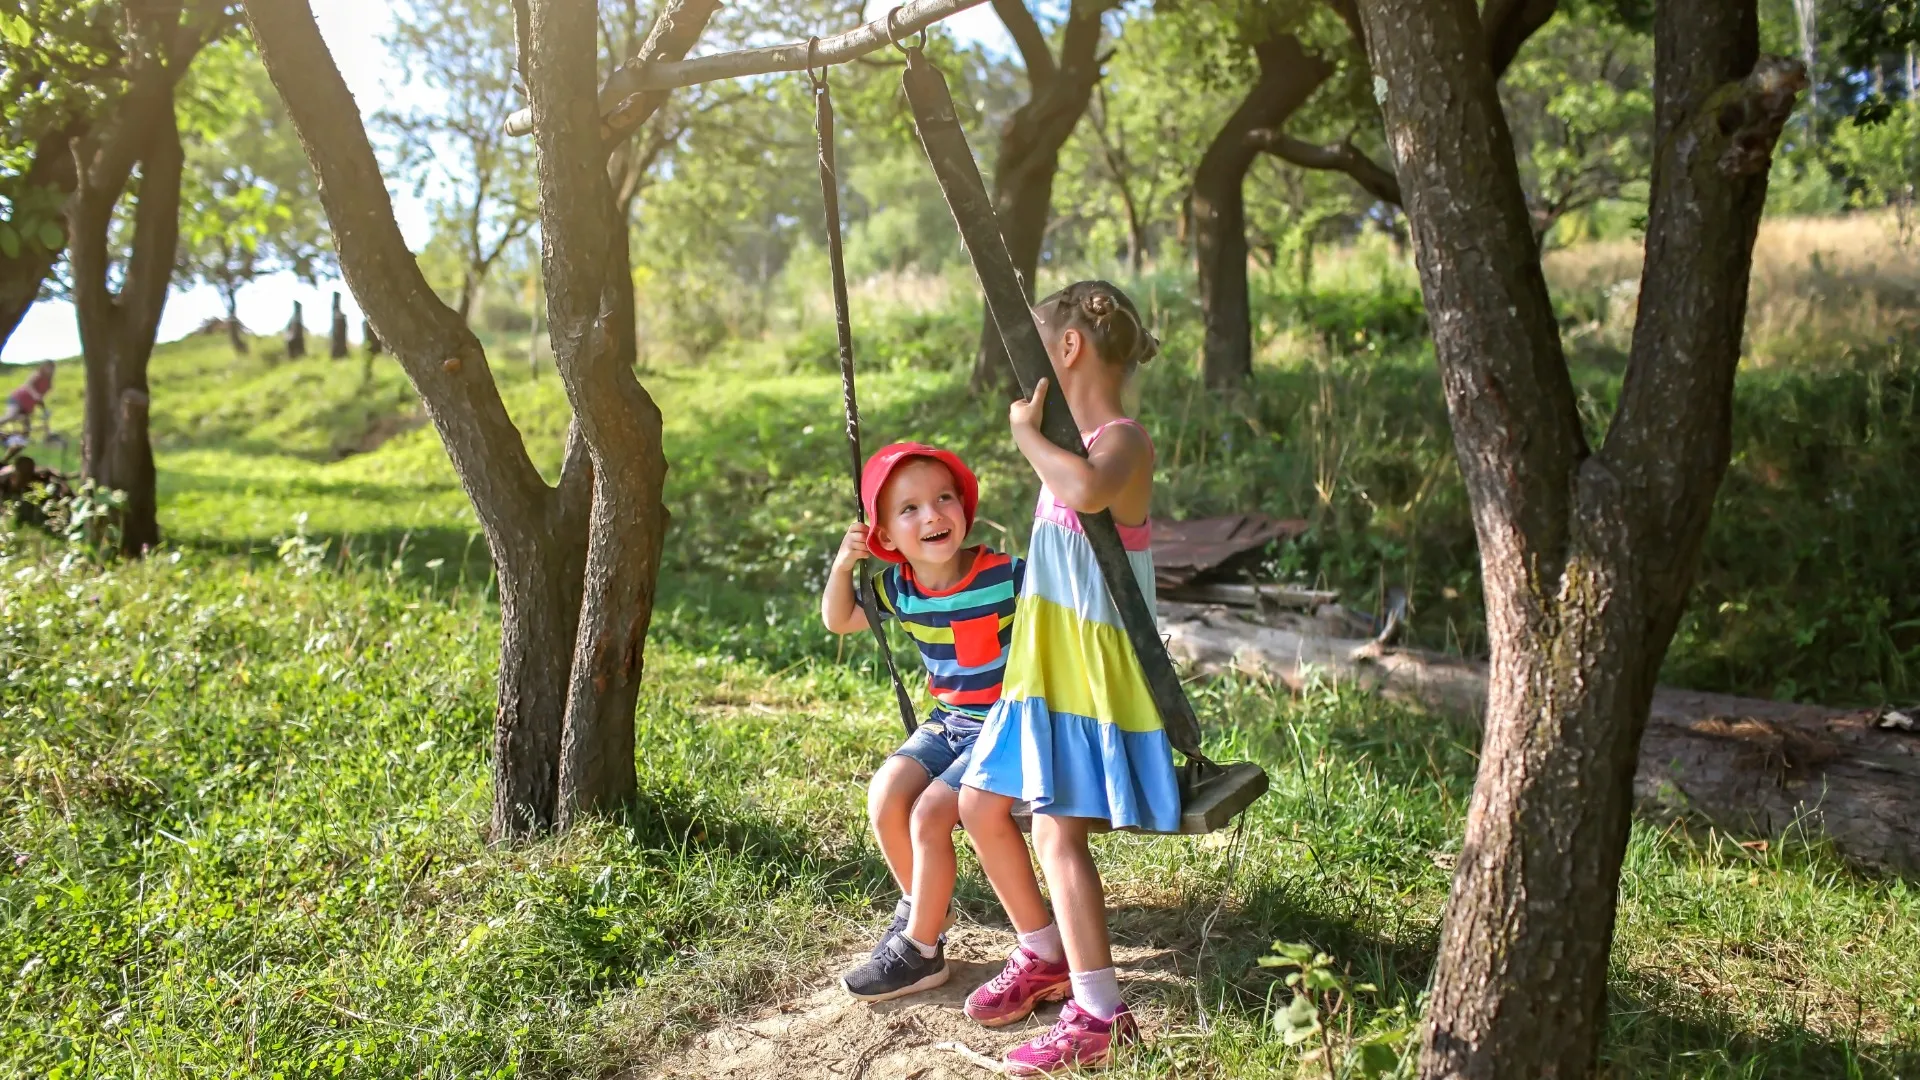 Kids at Play: The Importance of Playing Outside